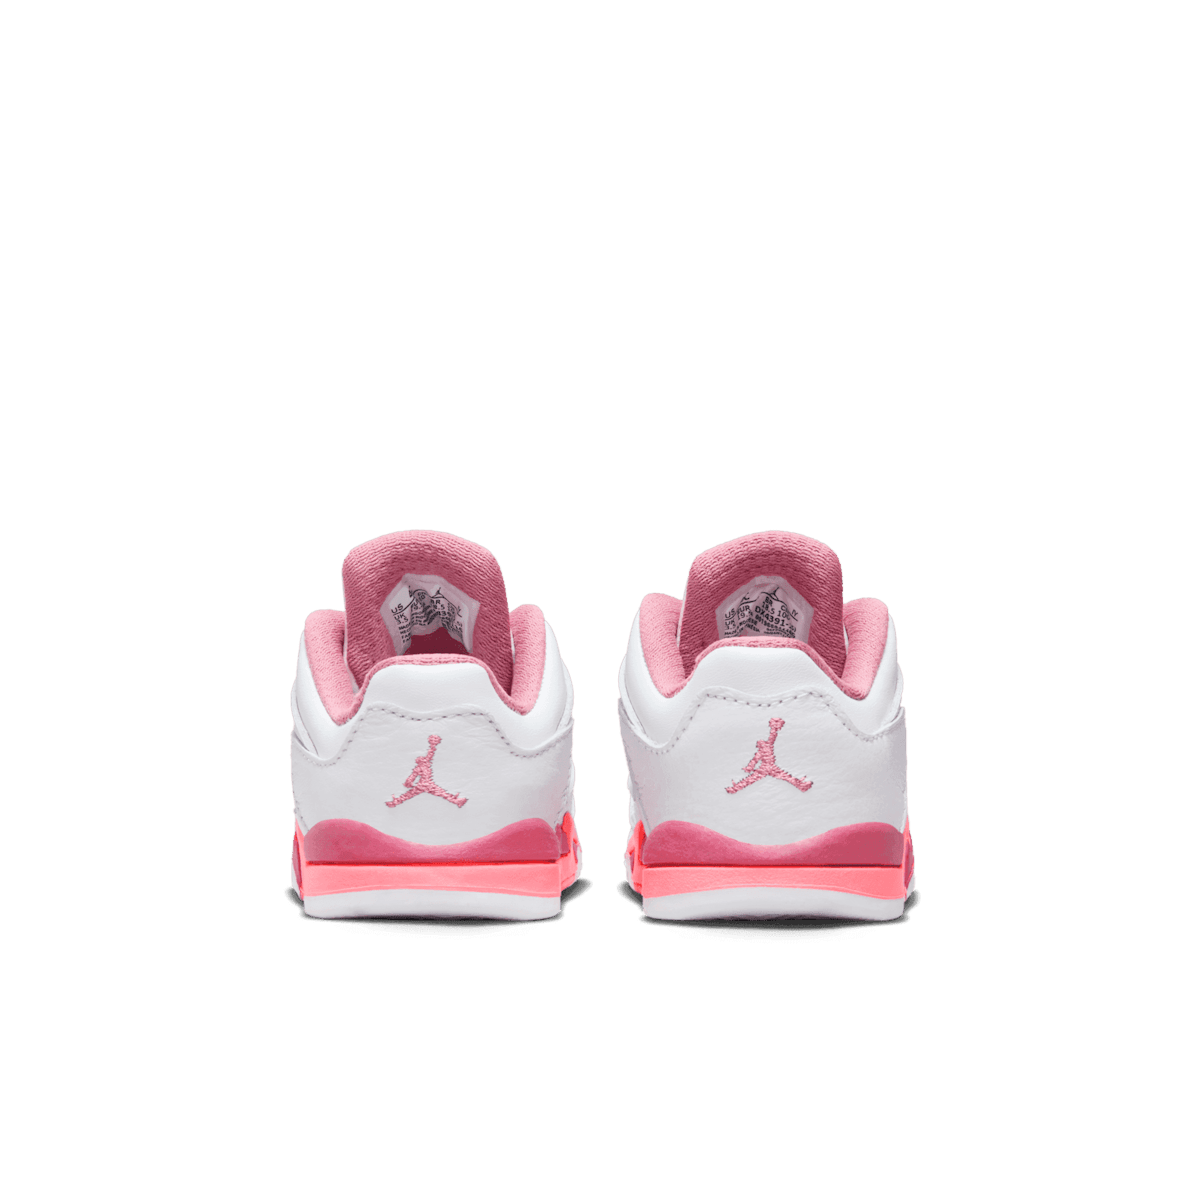 Air Jordan 5 Retro Low Crafted For Her (TD) Angle 3